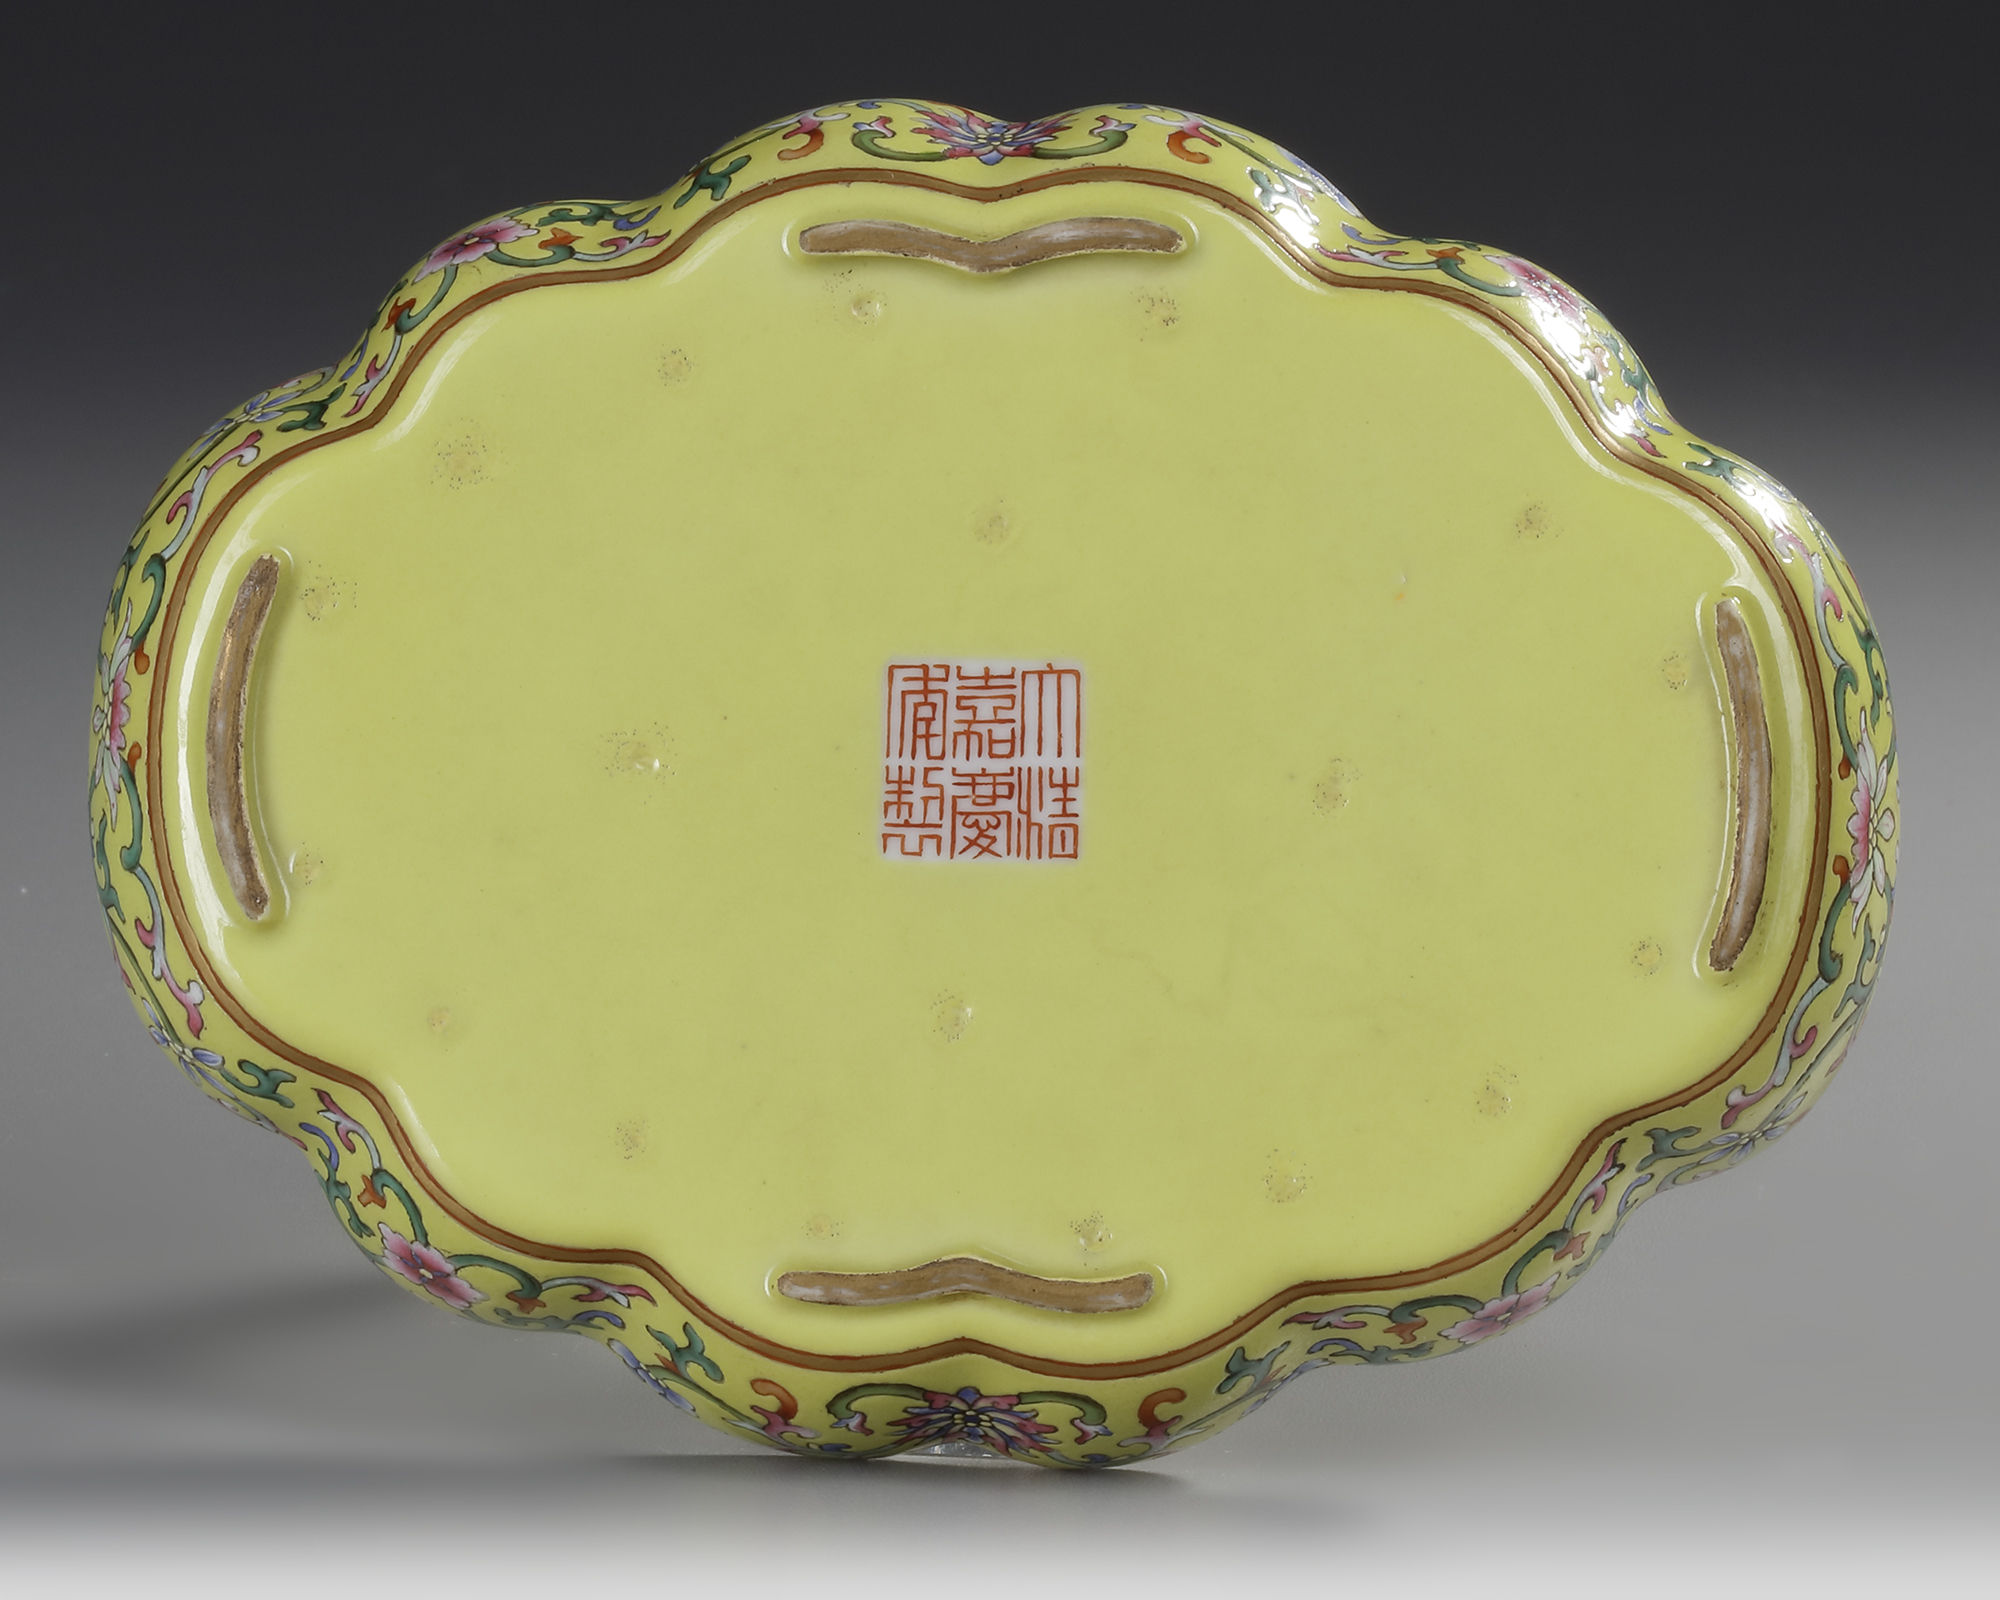 A CHINESE YELLOW-GROUND FAMILLE ROSE "TEA POEM" FOLIATE TRAY, QING DYNASTY (1636–1912) - Image 2 of 3